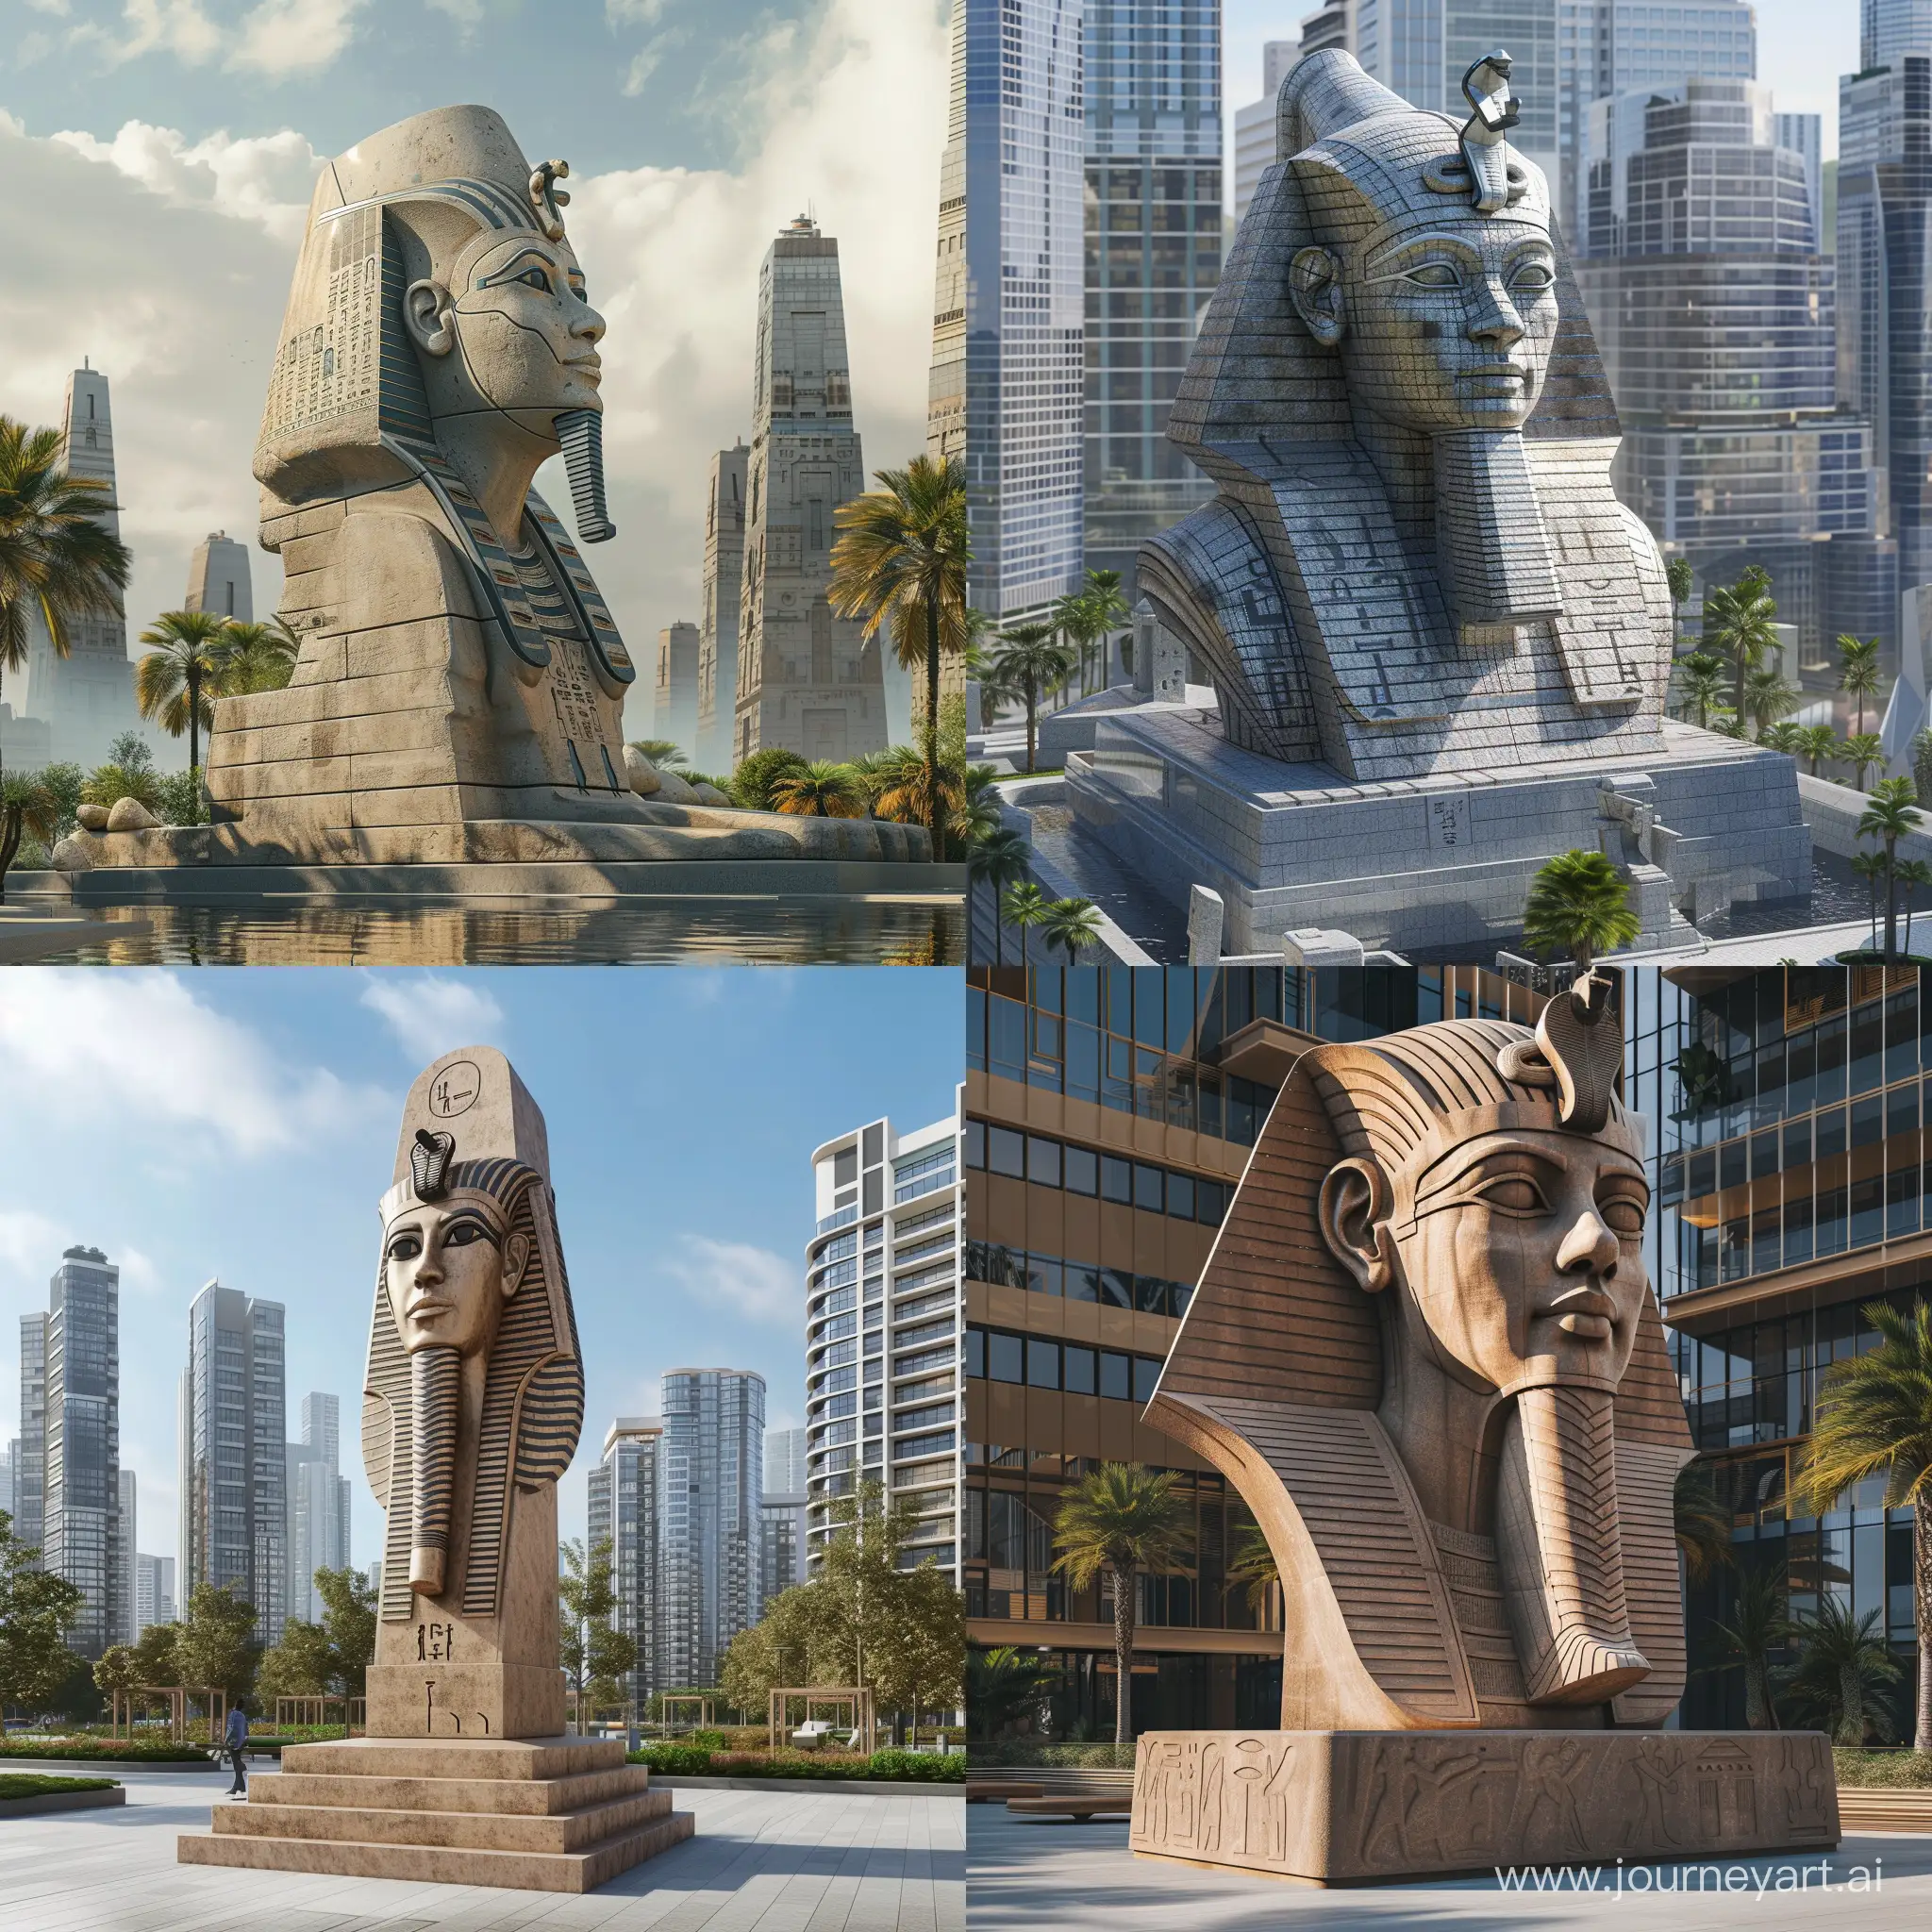 A monument in a modern city in the Pharaonic style with artificial intelligence